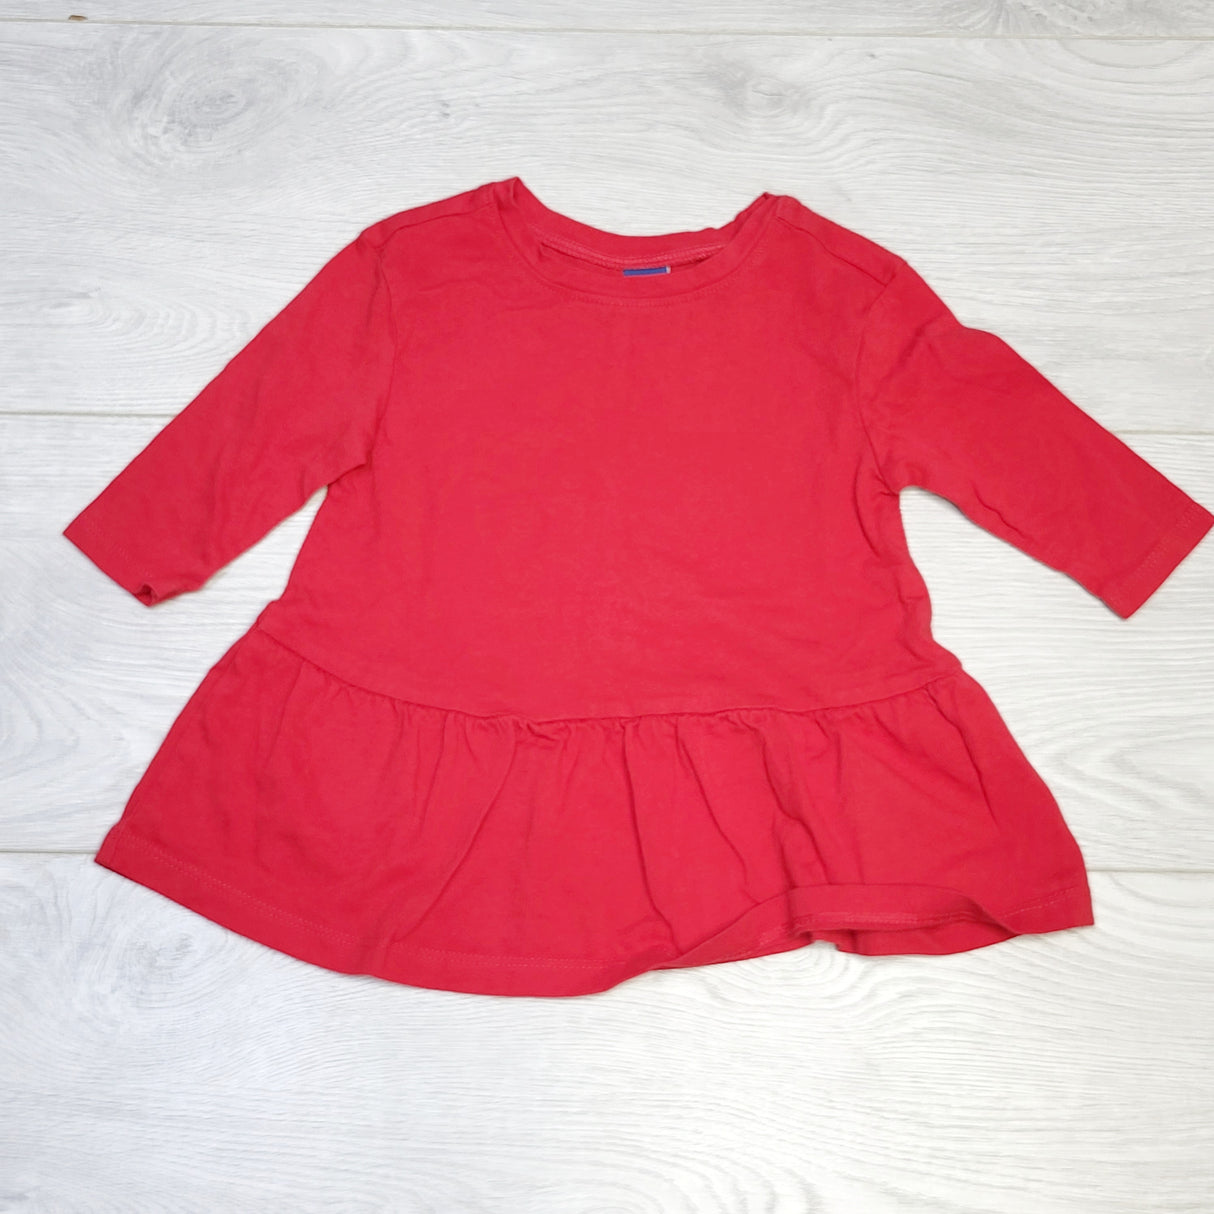 COWN1 - Old Navy red cotton dress, size 3-6 months